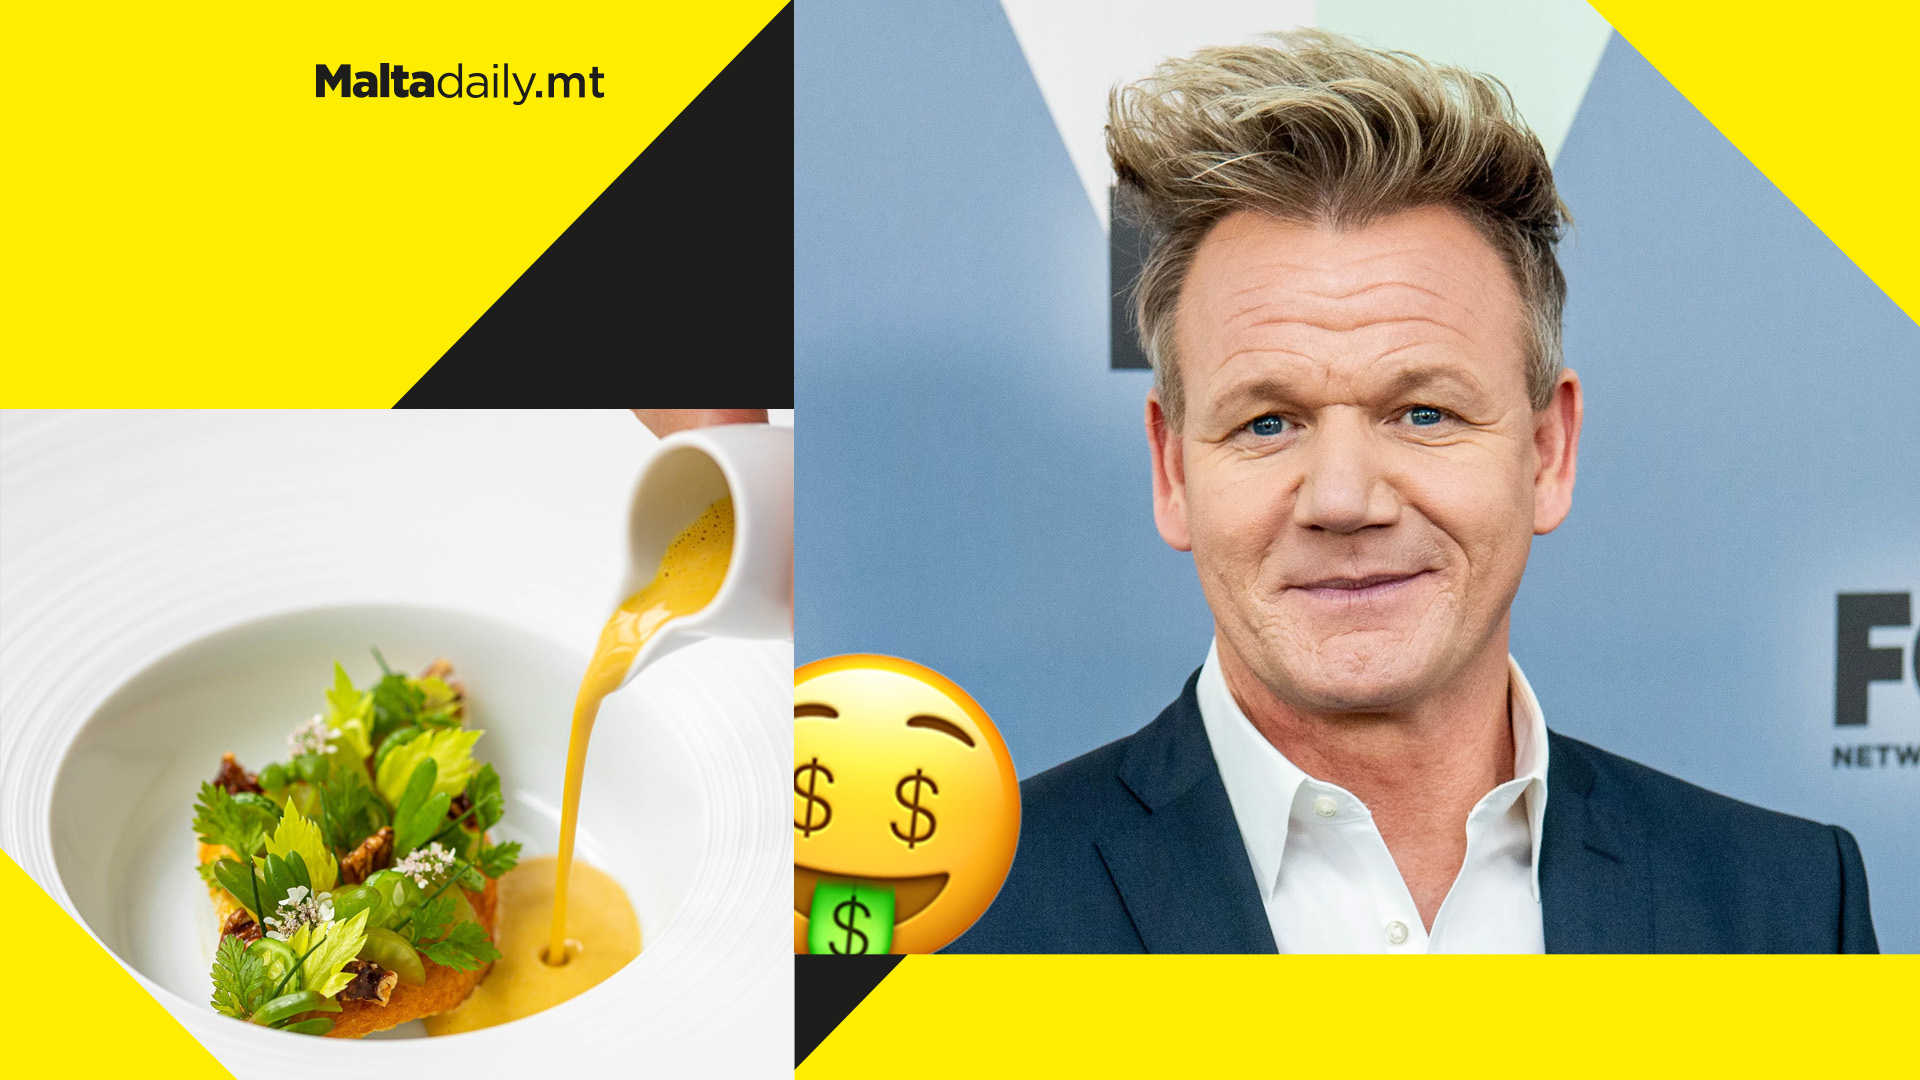 Gordon Ramsay's New Year's Dinner in London revealed to cost £675